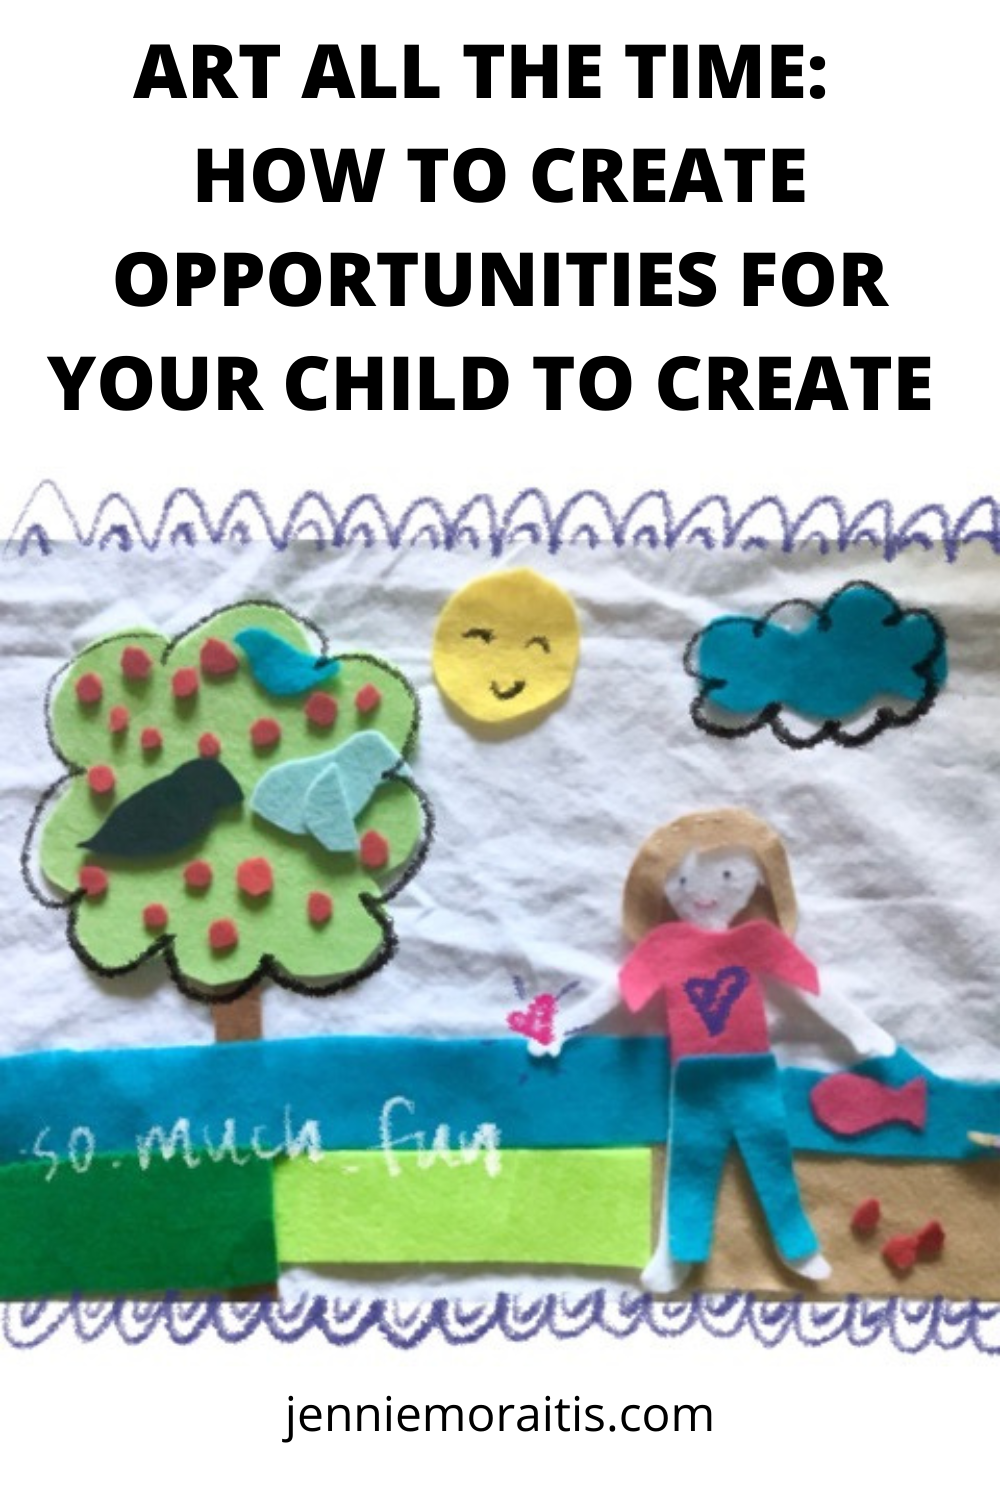 I love to make art, but I don’t always like to set it up and clean up afterwards. But that doesn’t mean my kiddo can’t create on her own! Here are some of the many ways I make art and creativity accessible for her on a daily basis.